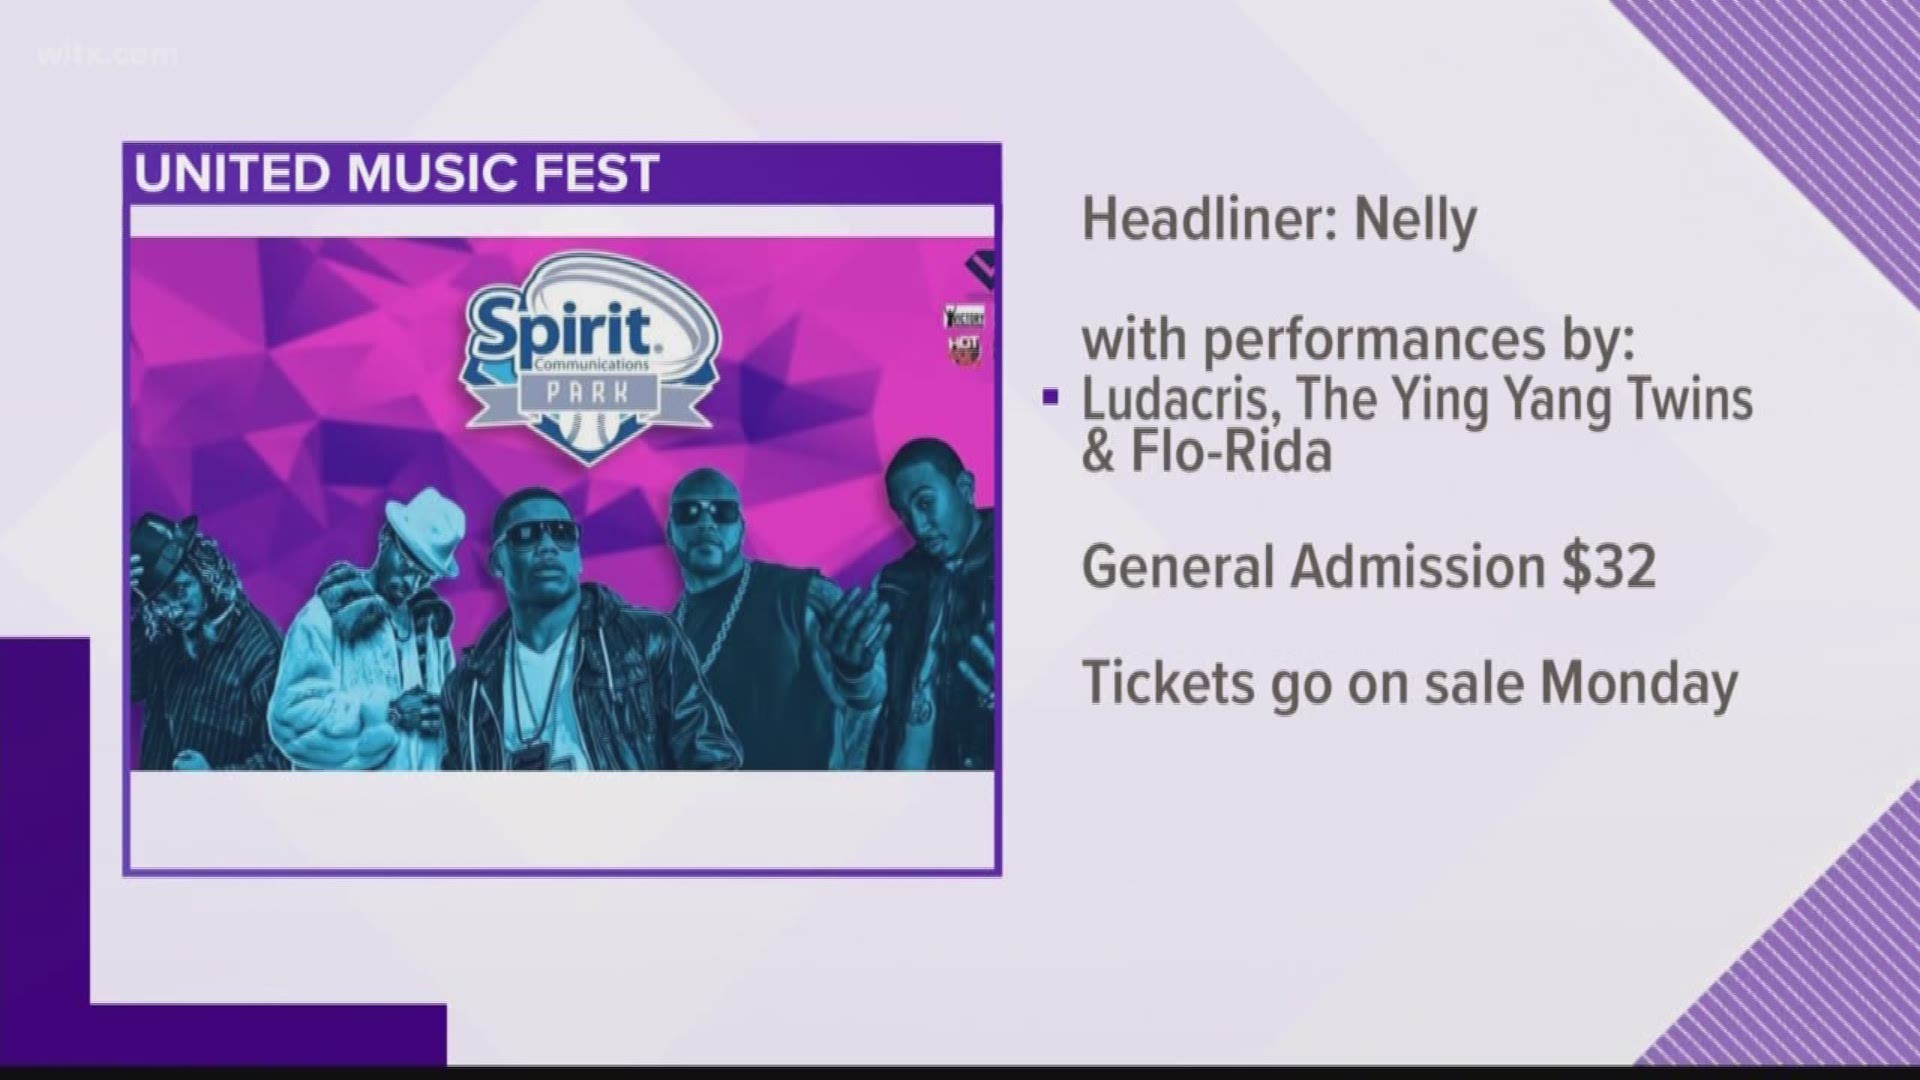 The hip-hop artists will be performing at the United Music Fest at Spirit Communications Park.